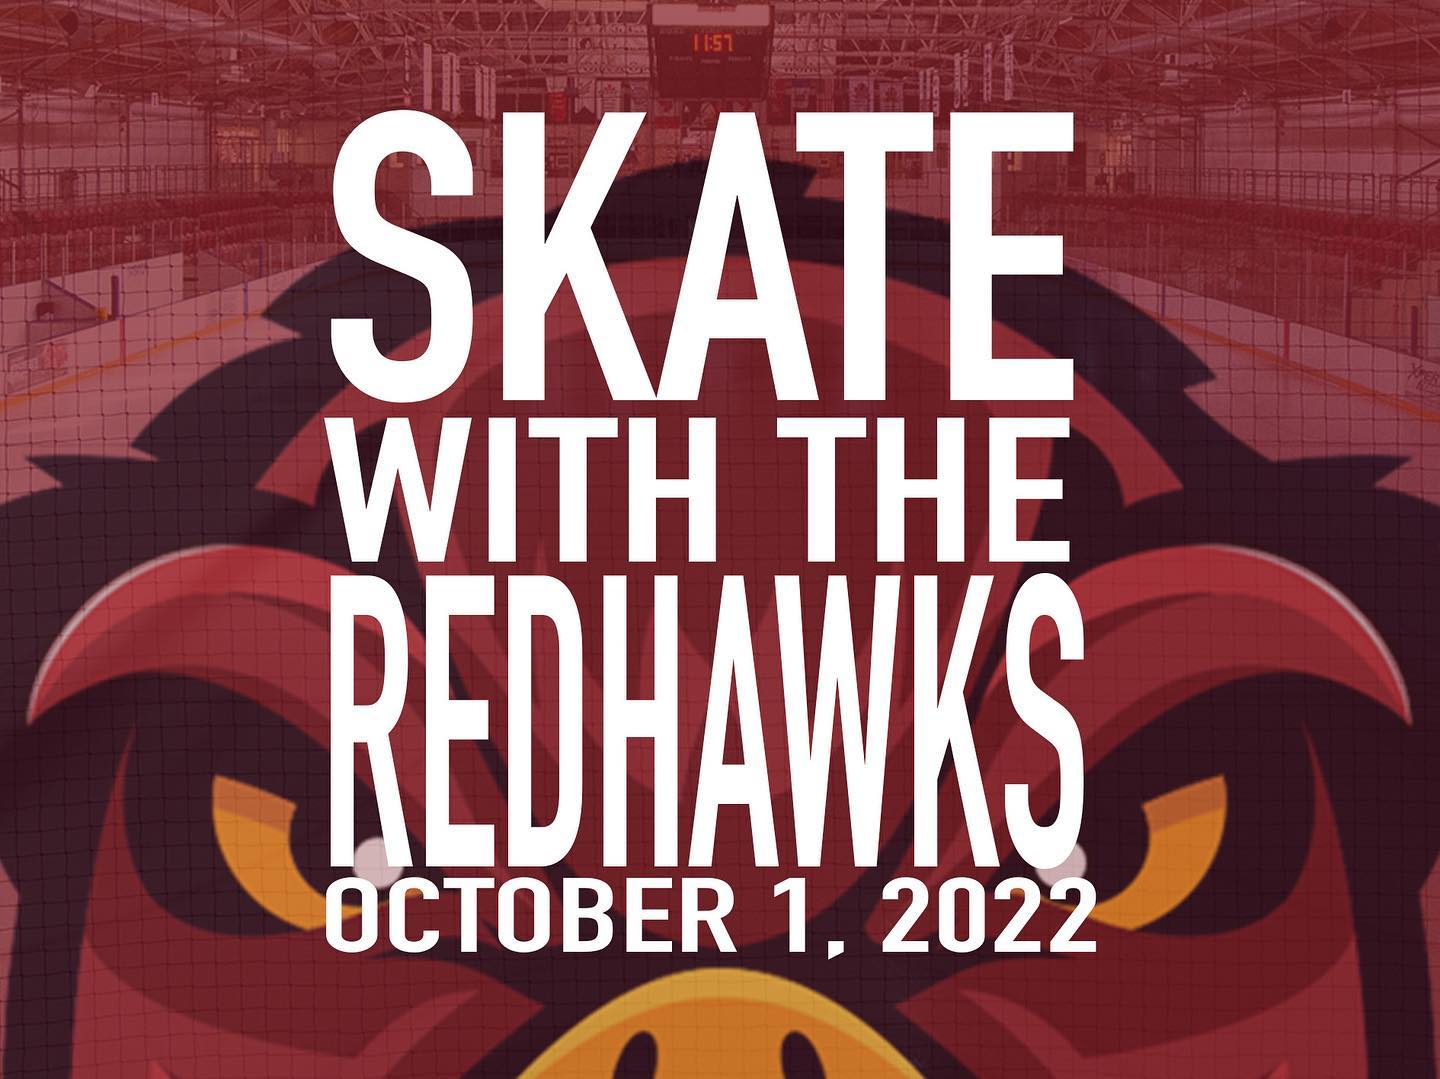 Only one week away! Let’s make our first Skate with the RedHawks in over a season a big one. 

Be sure to remember your helmet and skates for the event! Player signature sheets will be available for free before jumping on the ice as well. 

#RedHawksRiseUp